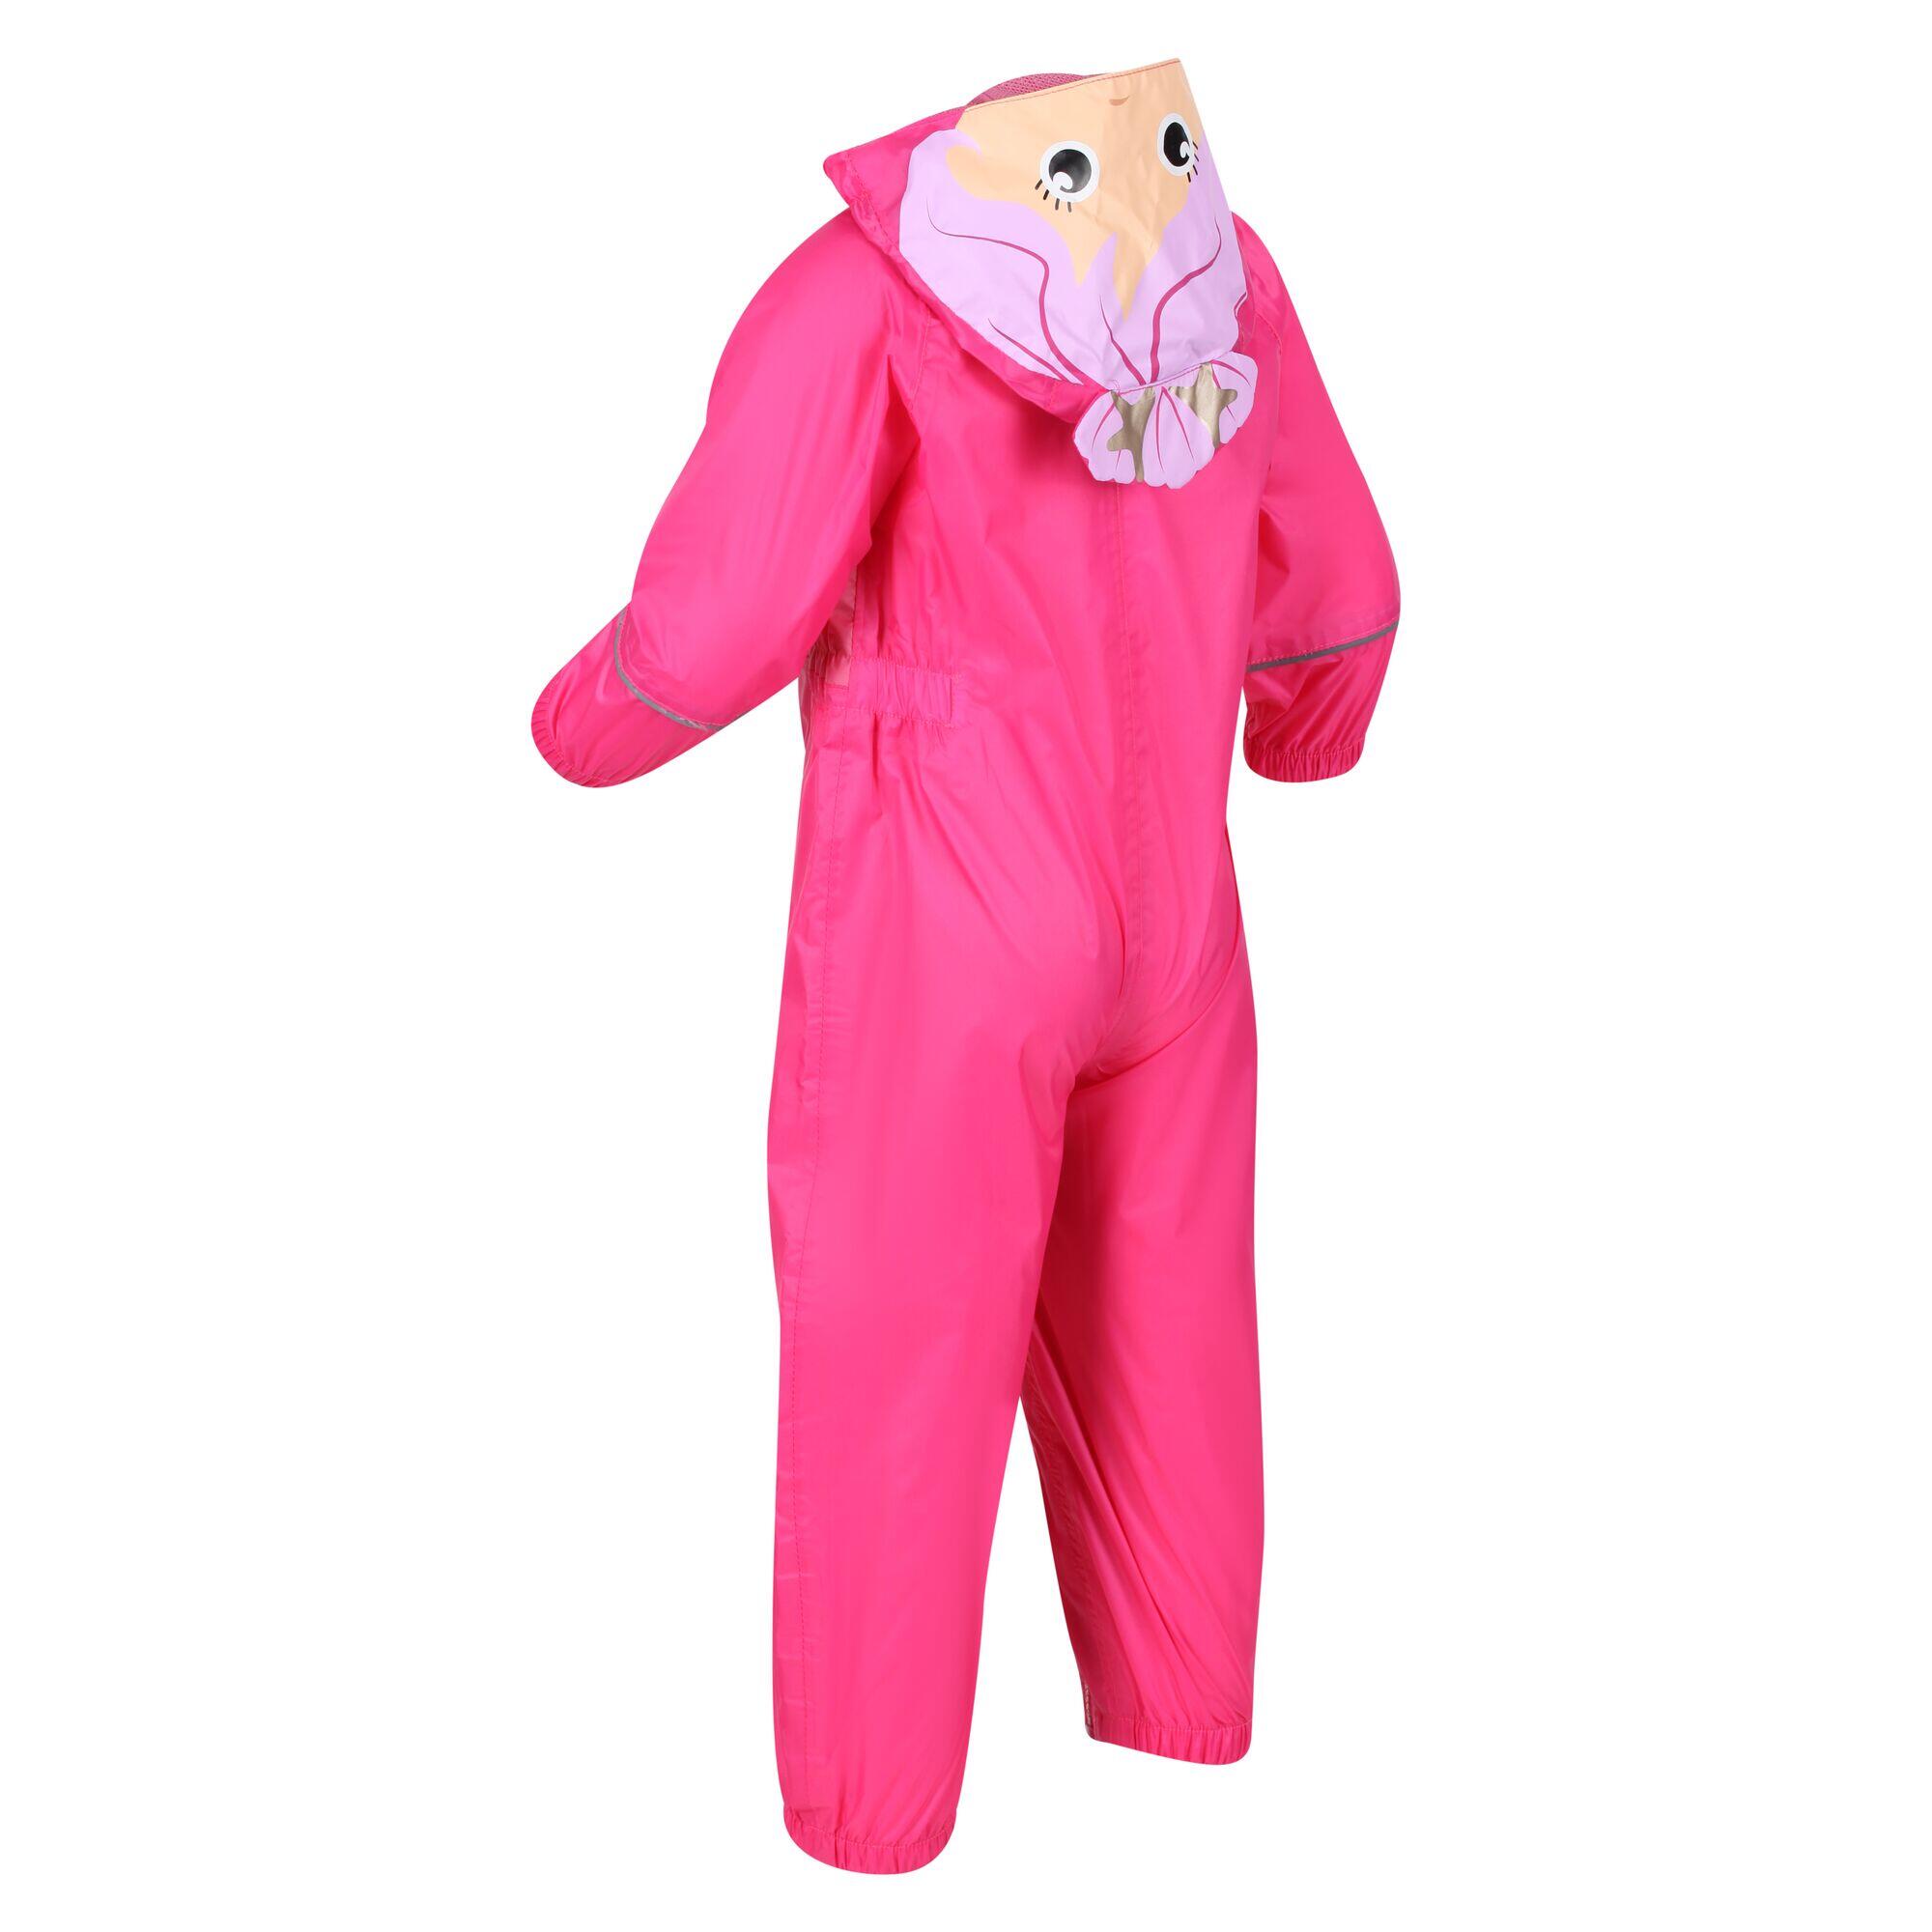 Charco Kids Hiking Hooded Puddle Suit - Pink Mermaid 2/4